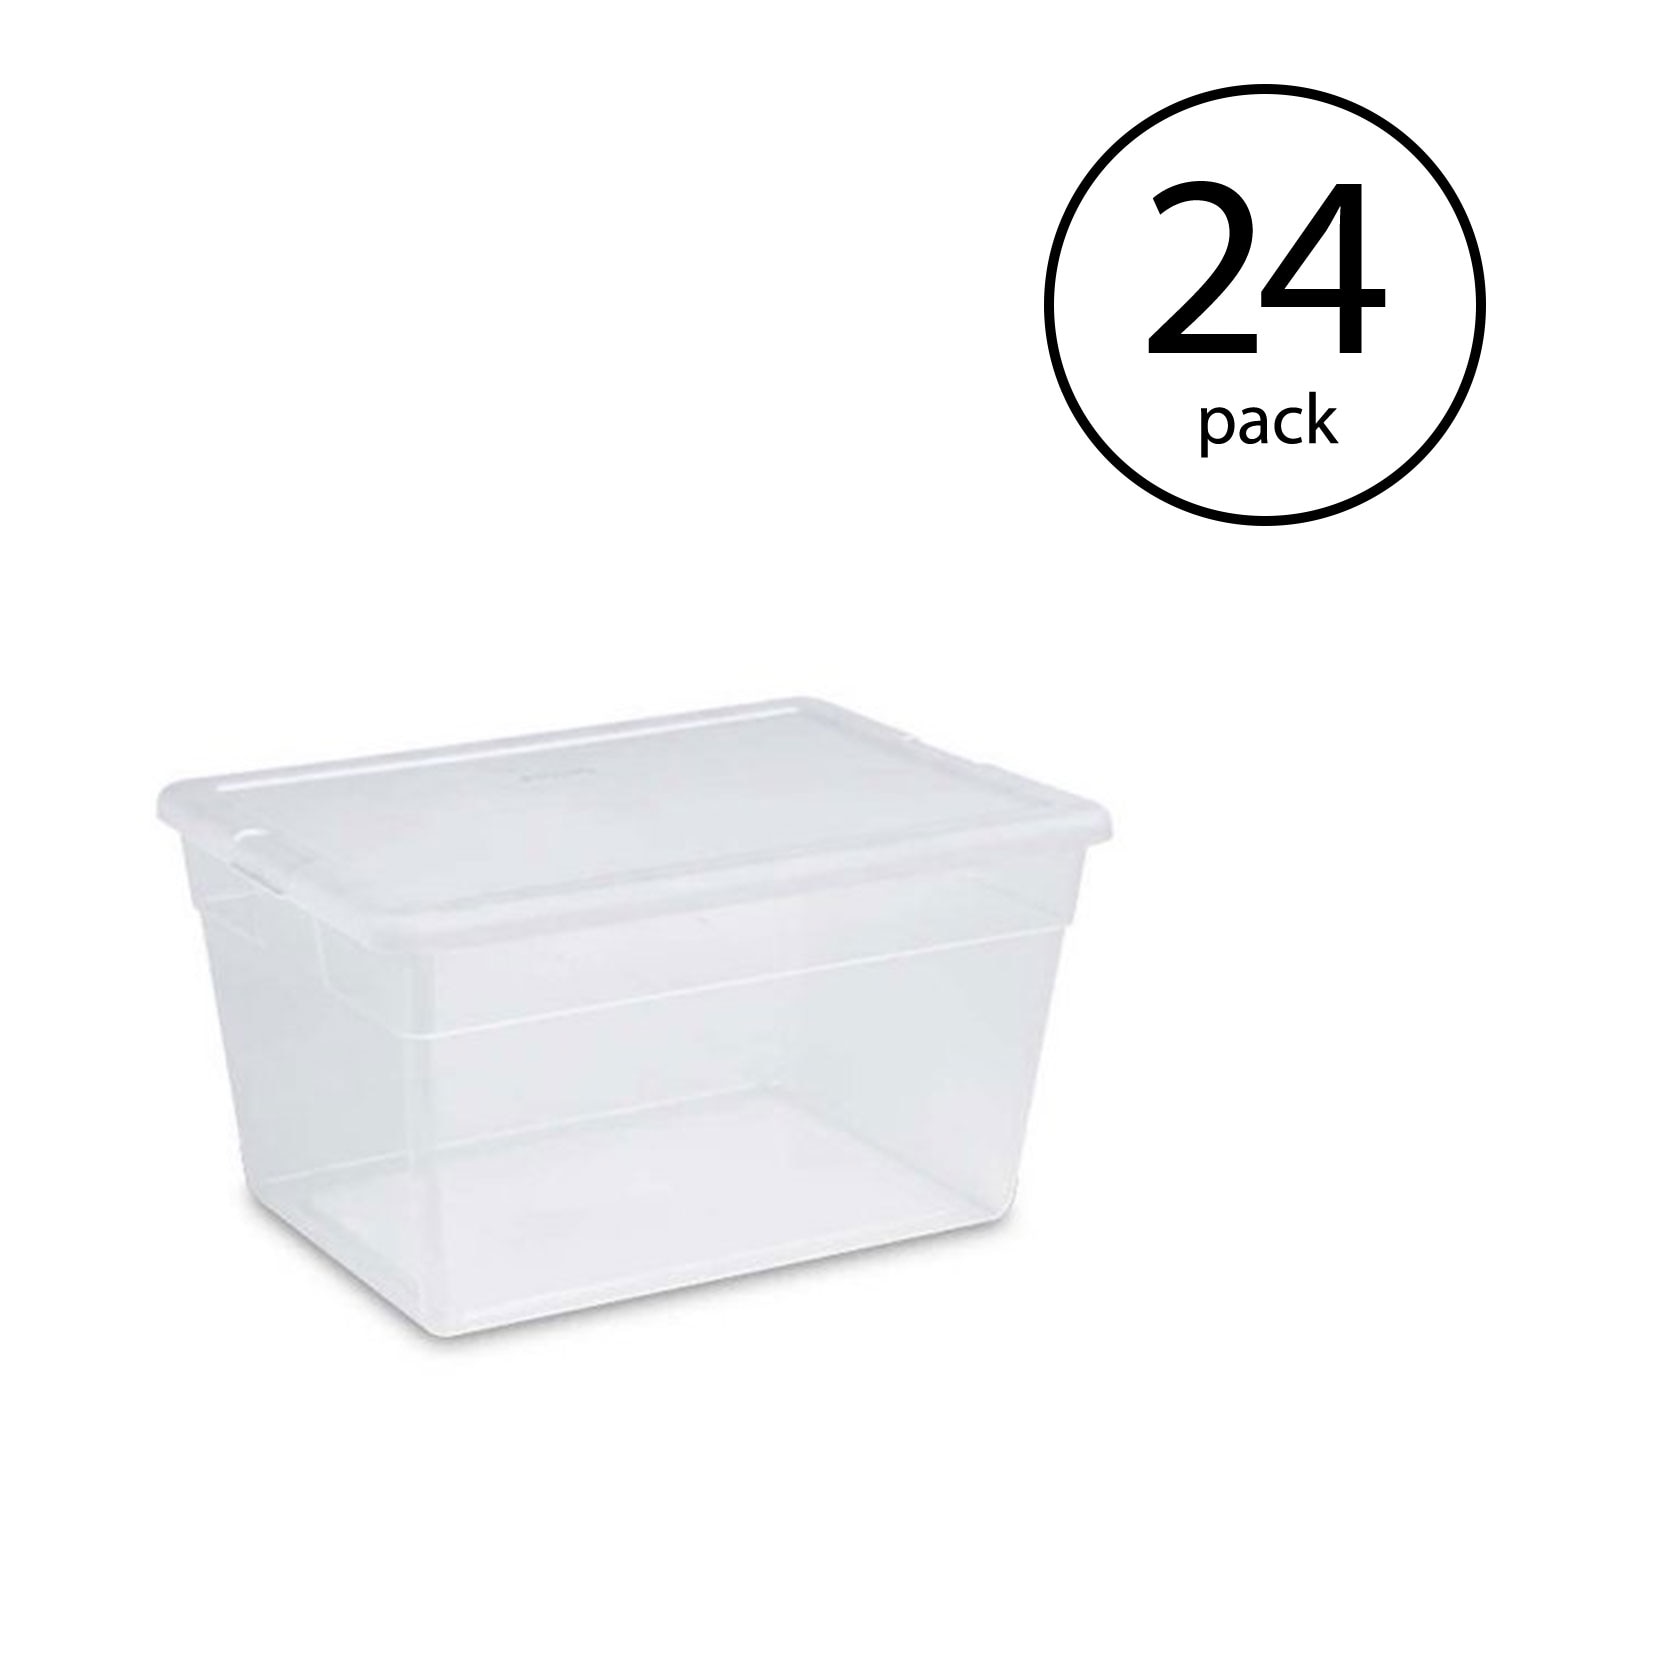 Sterilite 19 Gallon Plastic Stacker Tote, Heavy Duty Lidded Storage Bin  Container for Stackable Garage and Basement Organization, Black, 6-Pack